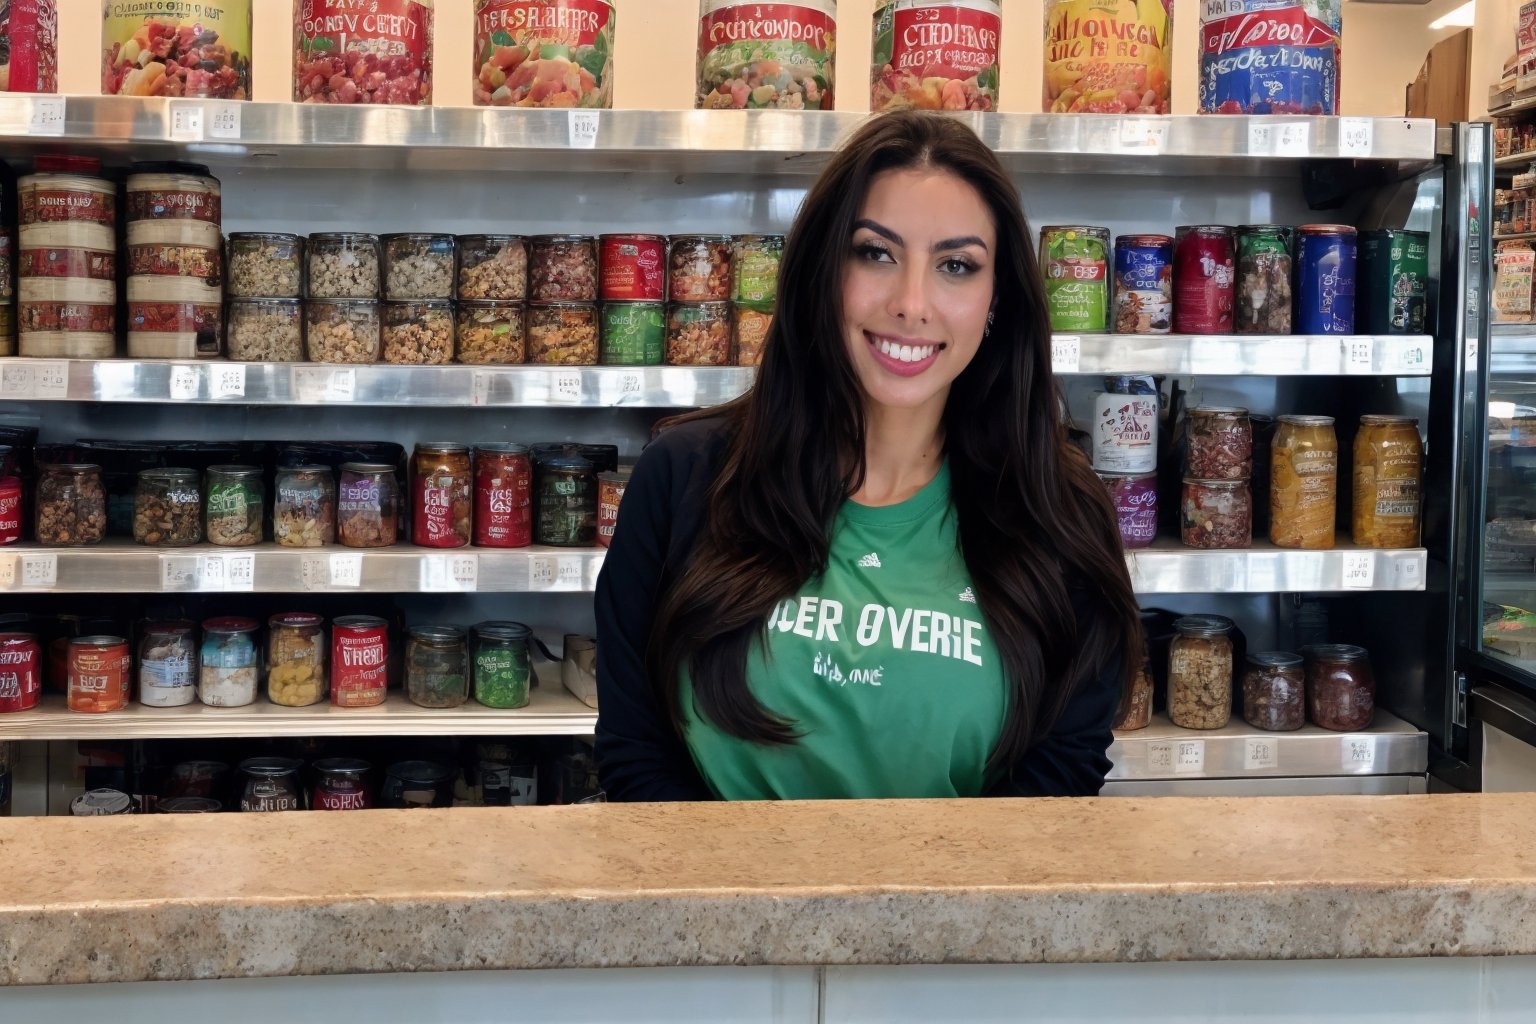  fairytale, 29 year old, straight long black hair, huge tits, extremely cute Mexican woman, (((behind the counter))) of a little town store, background of shelves full of food cans,( (two glass shelves one on each side of her,  on top of the counter filled with candies)), she wears a long sleeve green Abercrombie shirt and jeans, she leans towards the counter letting the observer see her nice tits, low intensity lights on the store